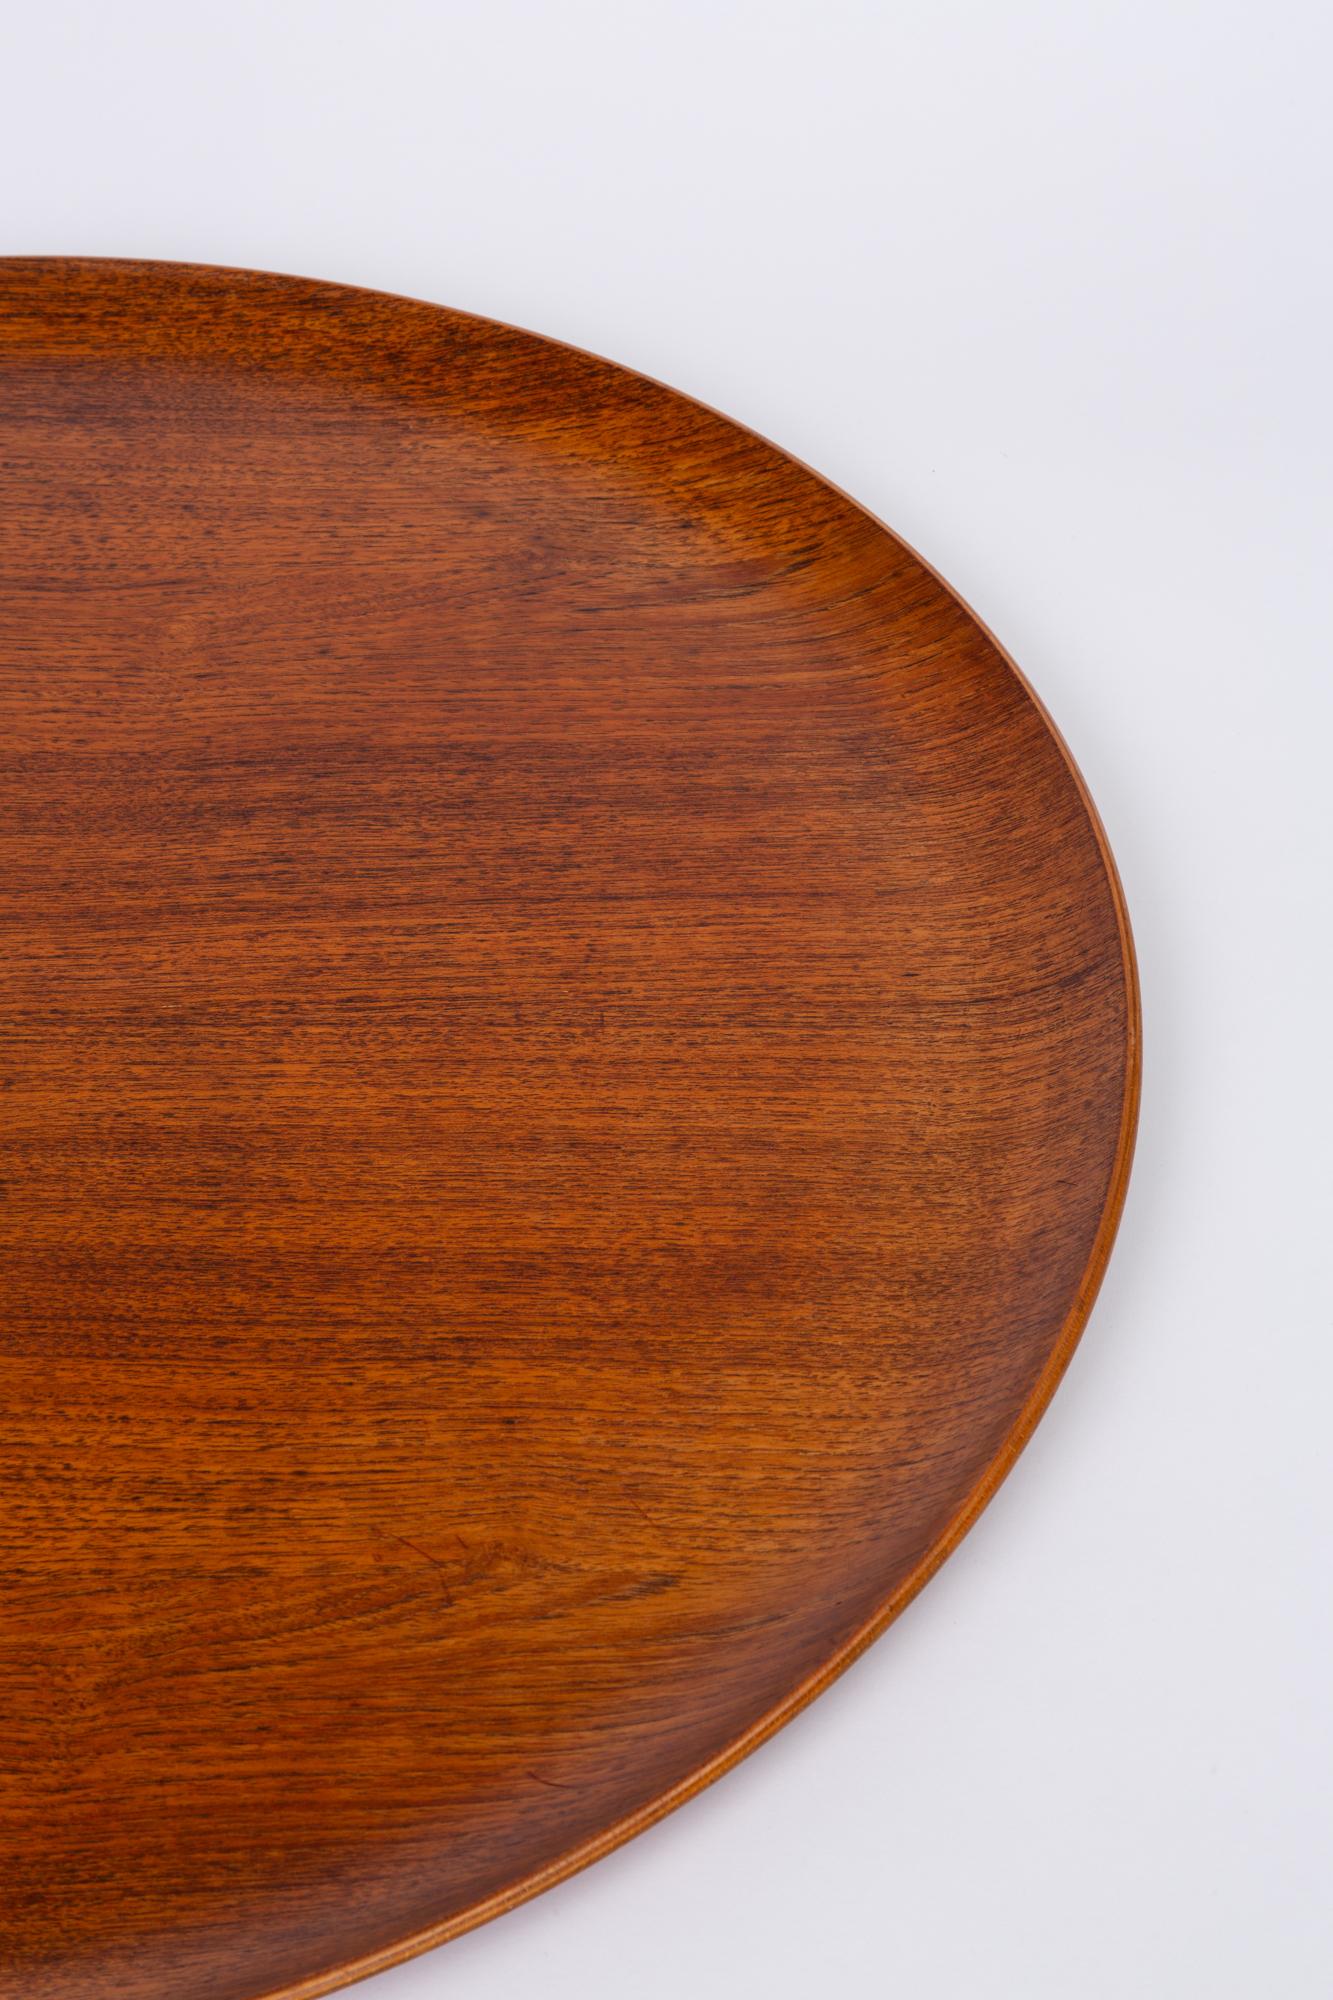 20th Century Jens Quistgaard Style Teak Tray with Curved Edge